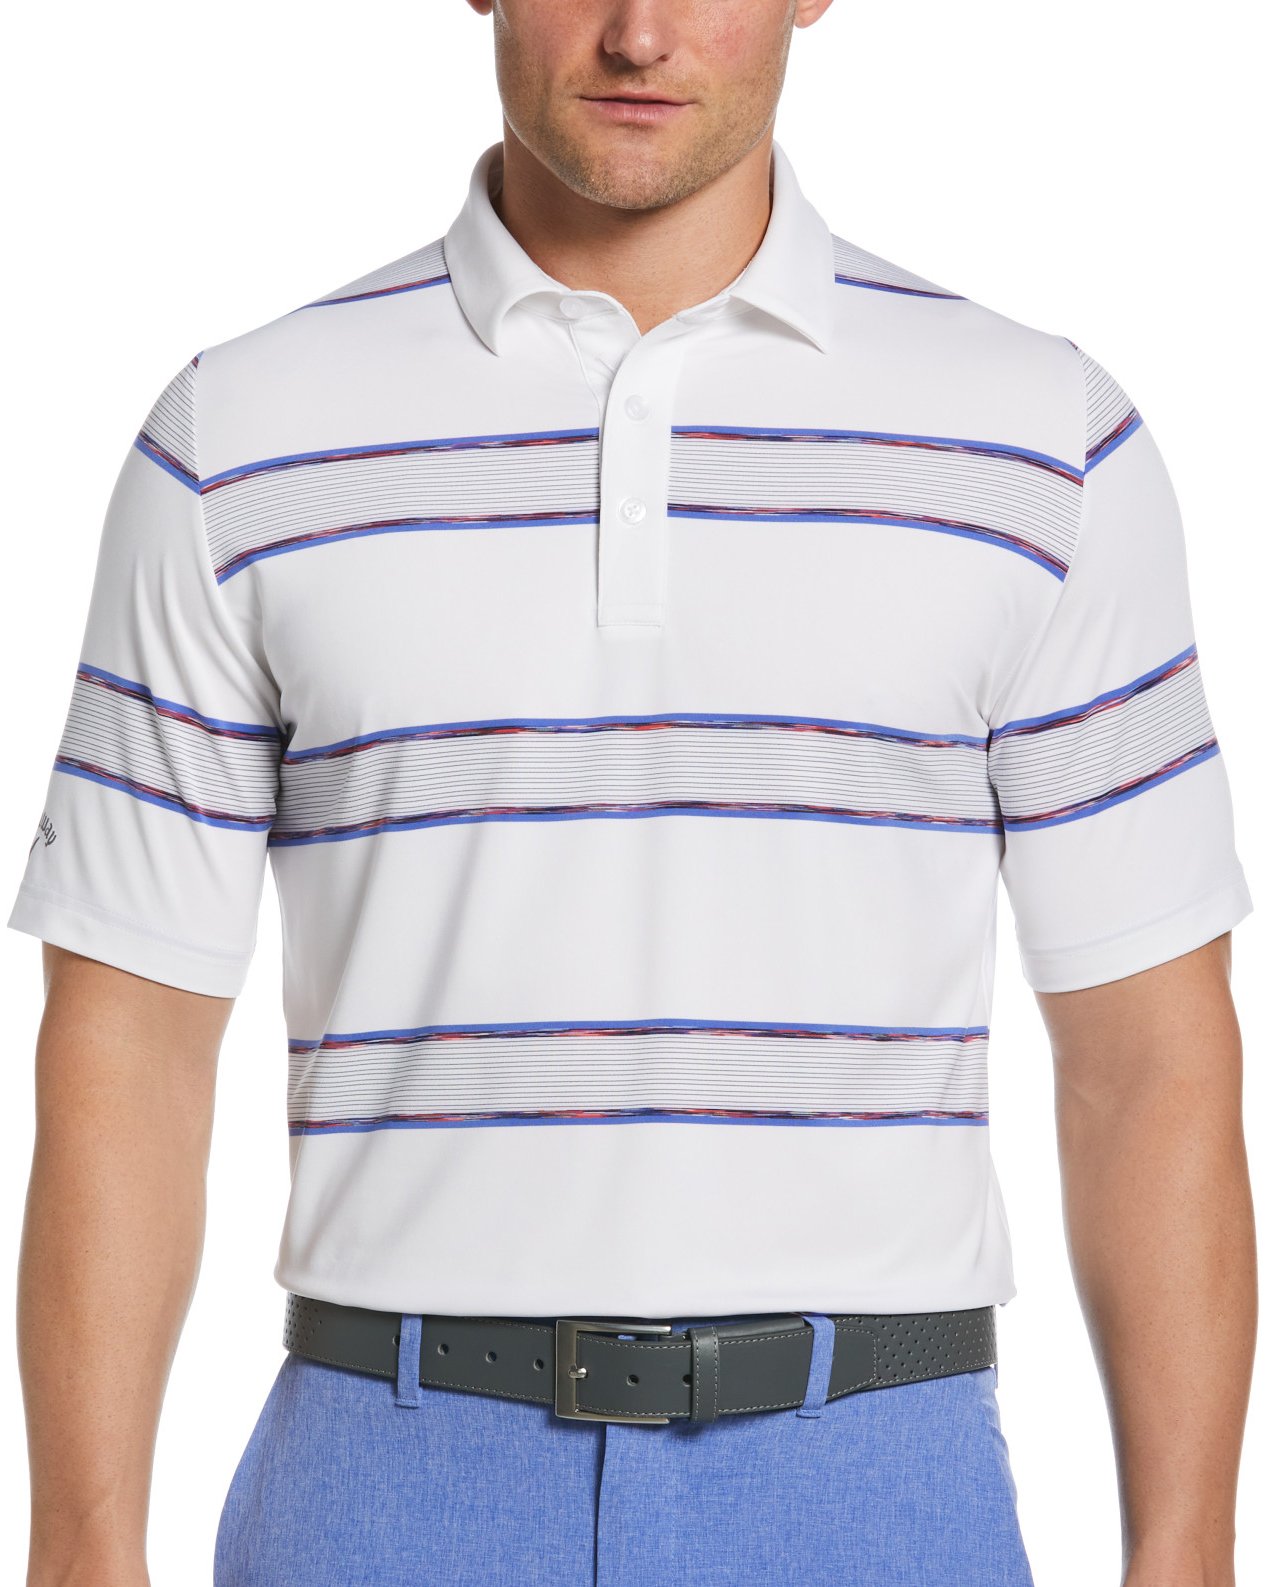 Save 43% on Callaway Men's Yarn Dyed Space Dye Filtered Stripe Golf Polo, Polyester/elastane In Bright White, Size S